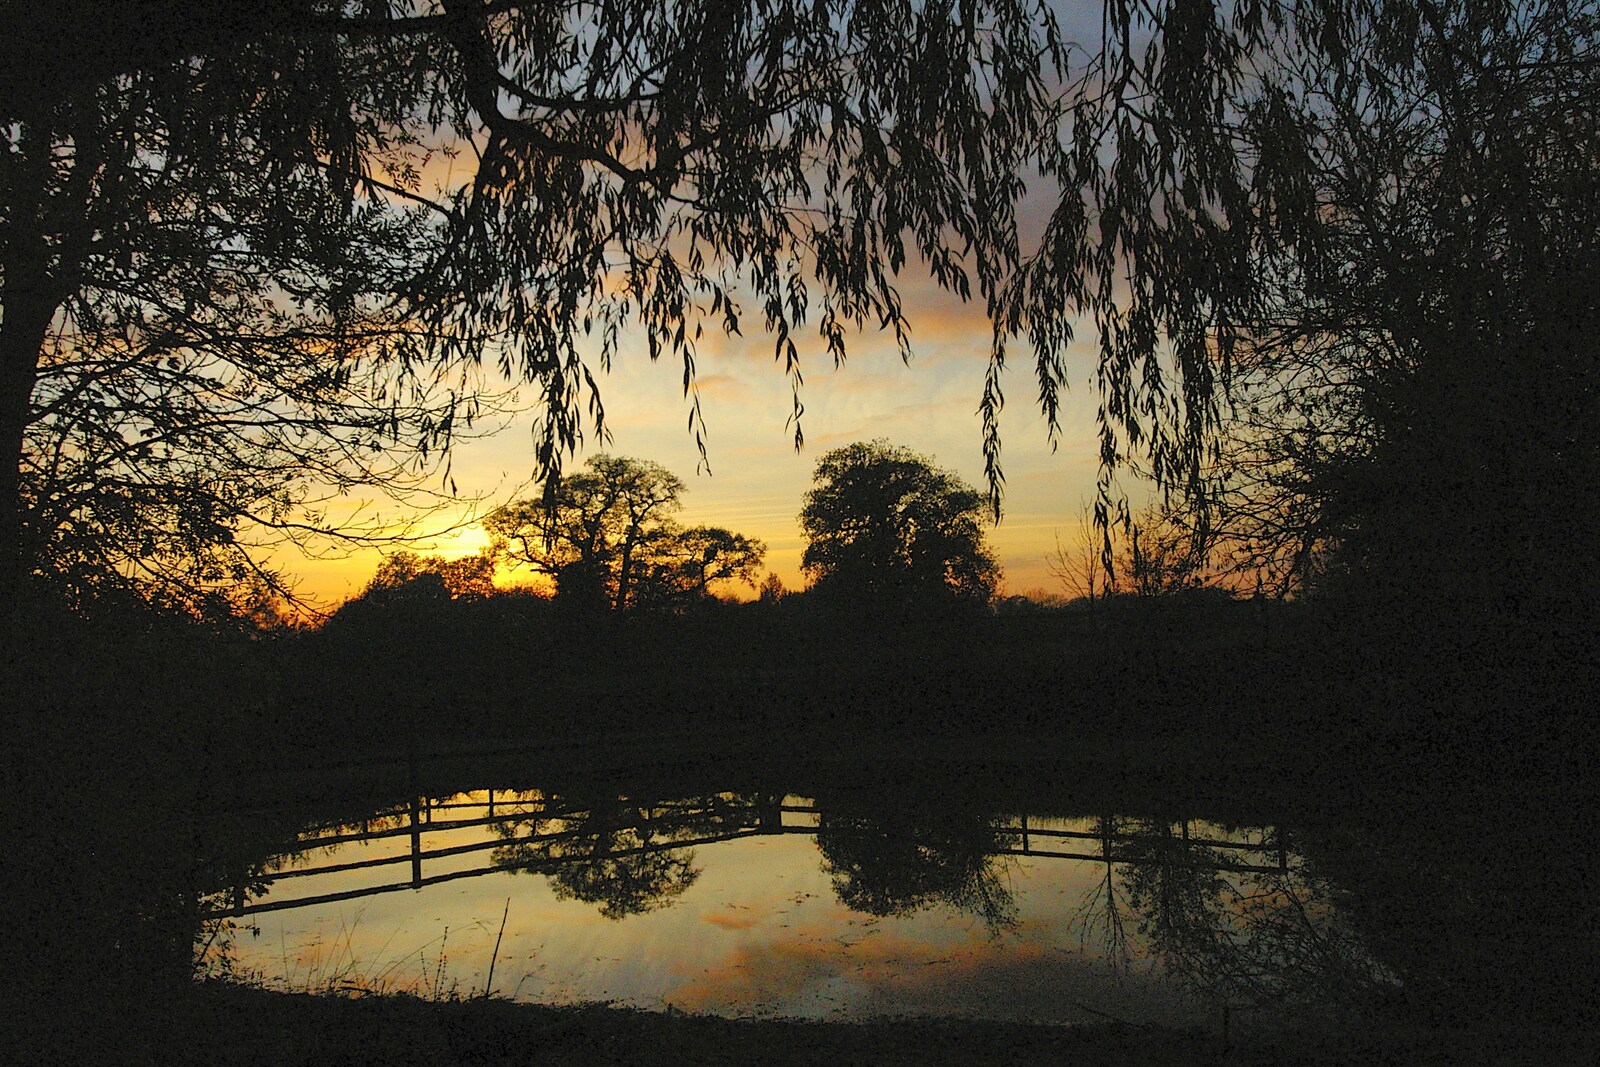 A nice sunset over the pond from Thornham Walled Garden, and Bob Last Leaves the Lab, Cambridge - 20th November 2005